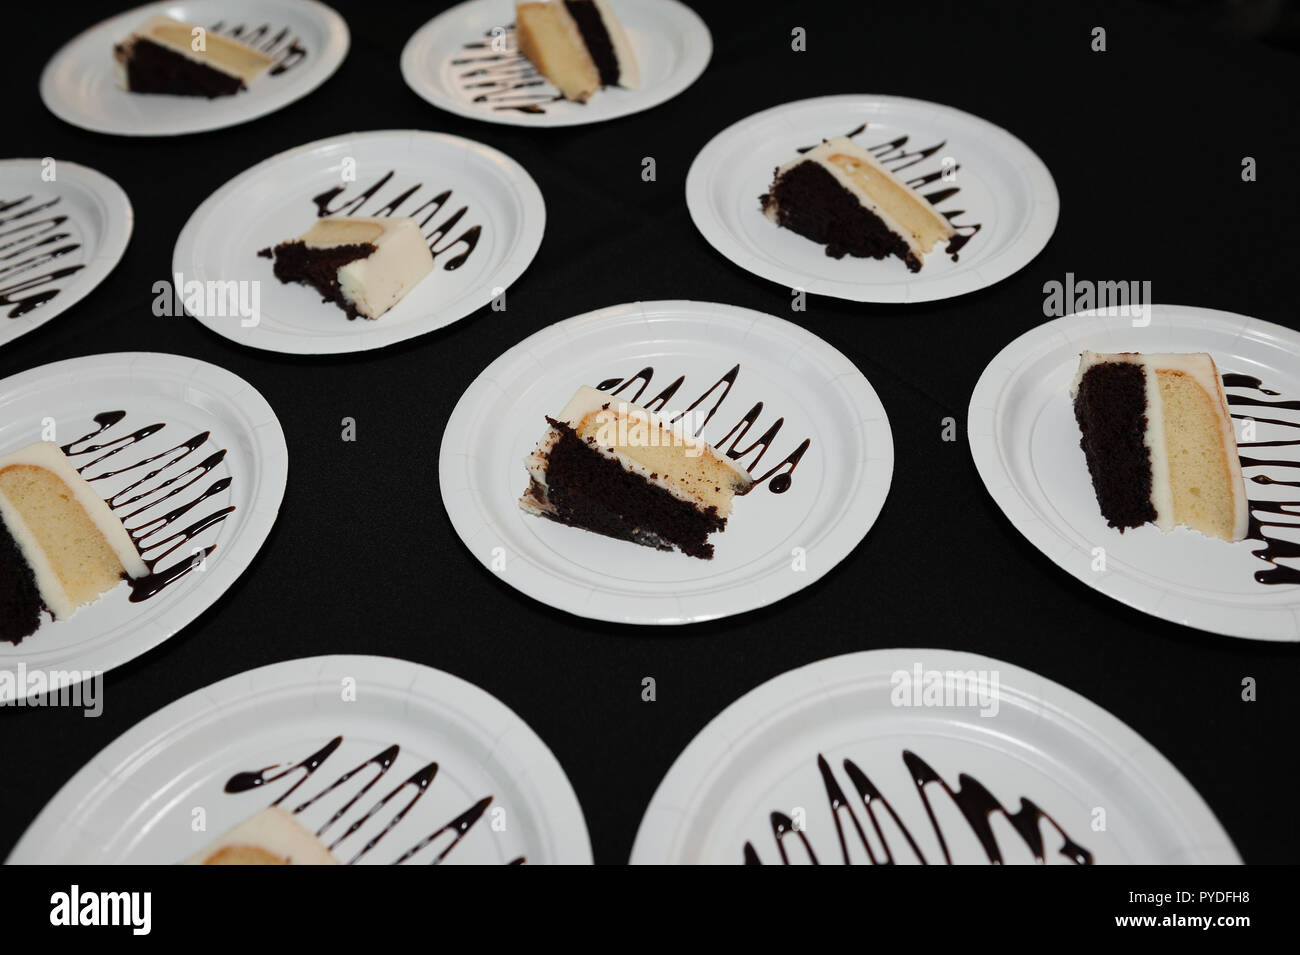 Plates of dark chocolate and vanilla cake drizzled with frosting at a reception. Stock Photo